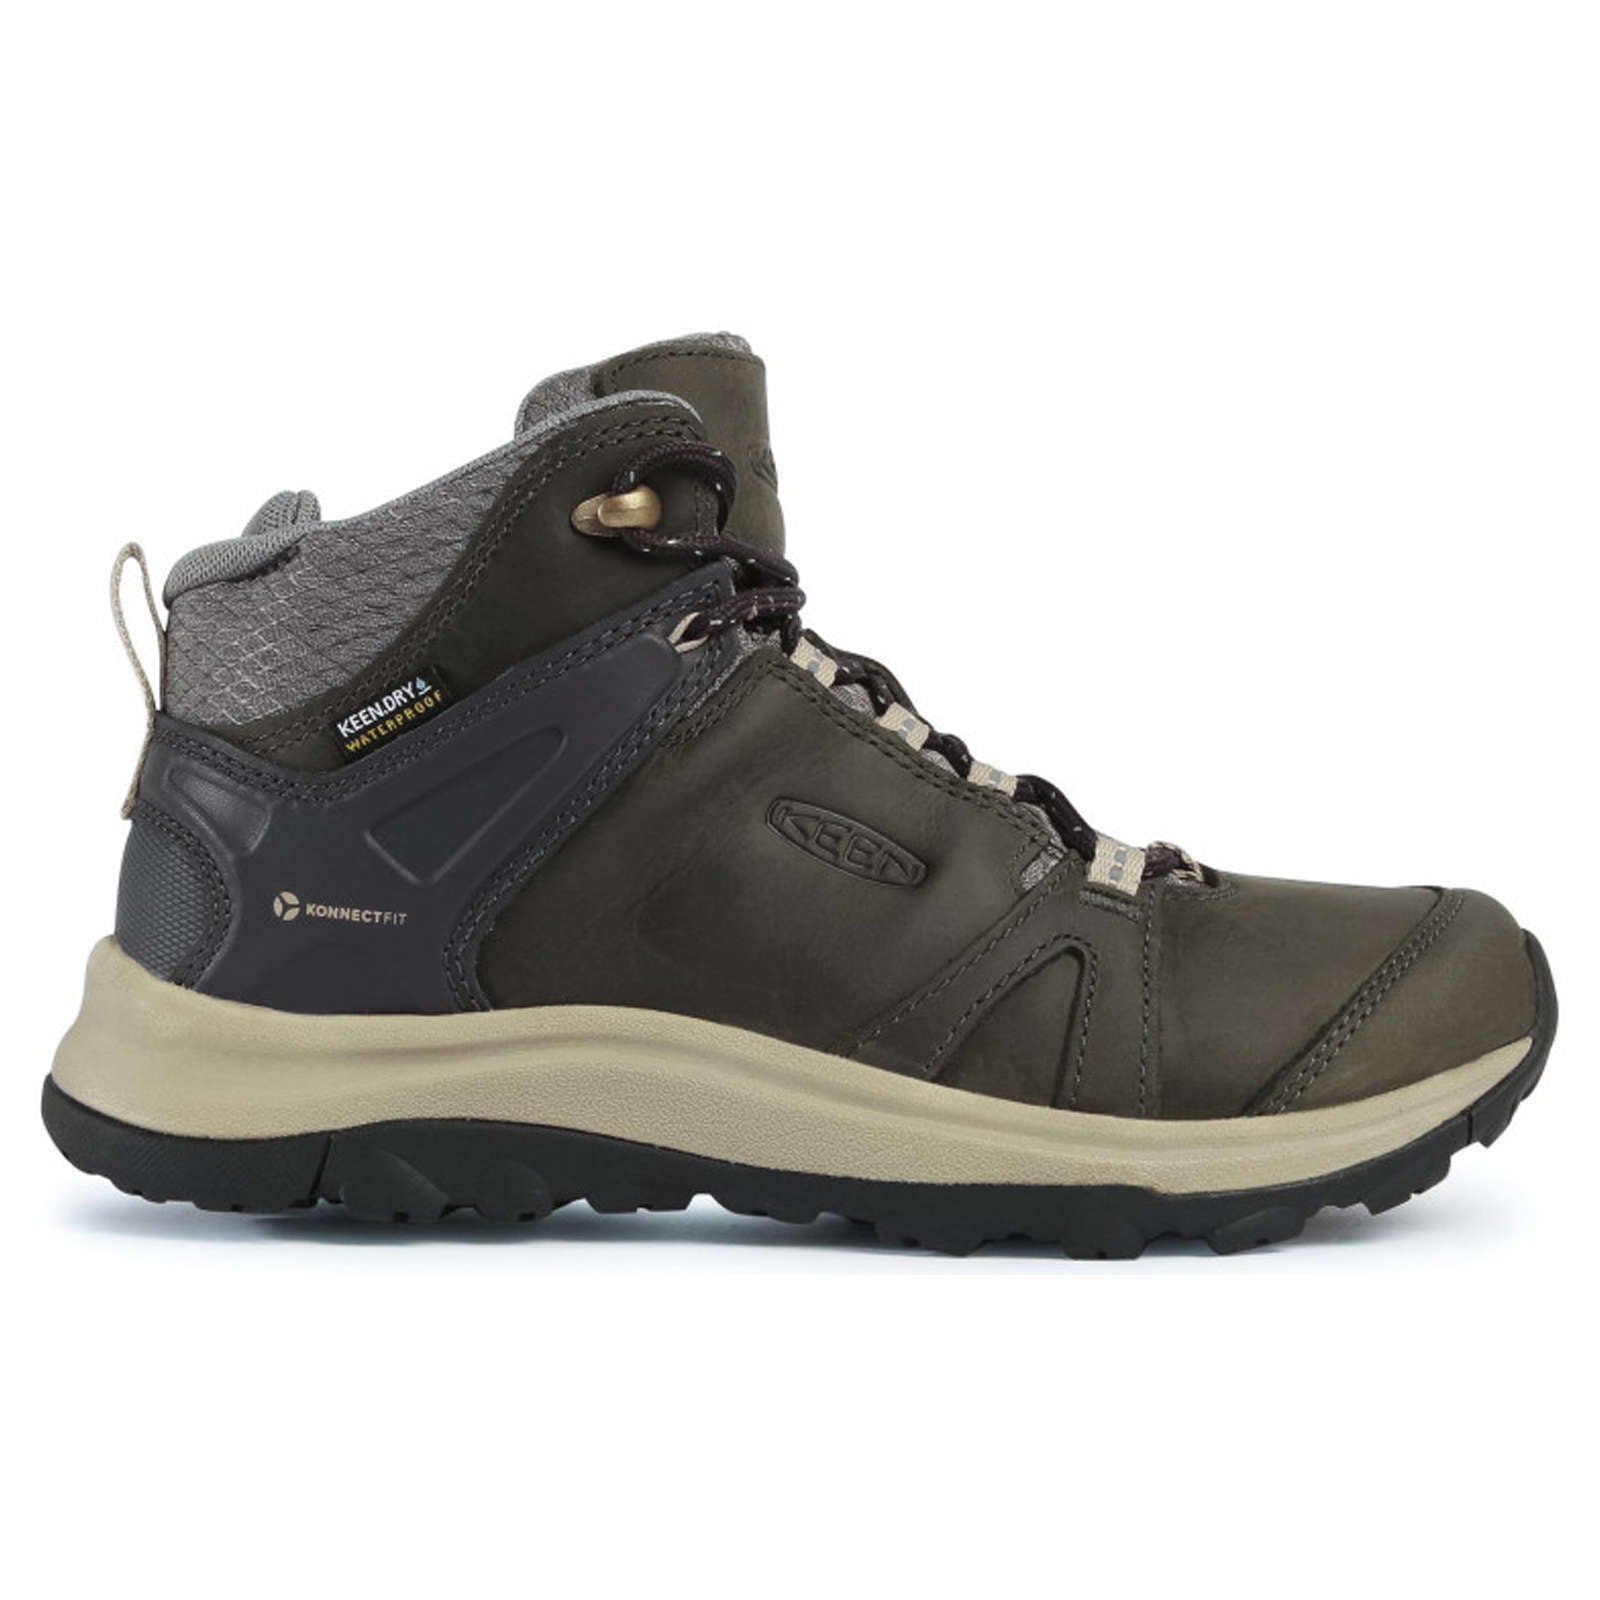 Keen Terradora II Mid Waterproof Leather Women's Hiking Boots#color_magnet plaza taupe